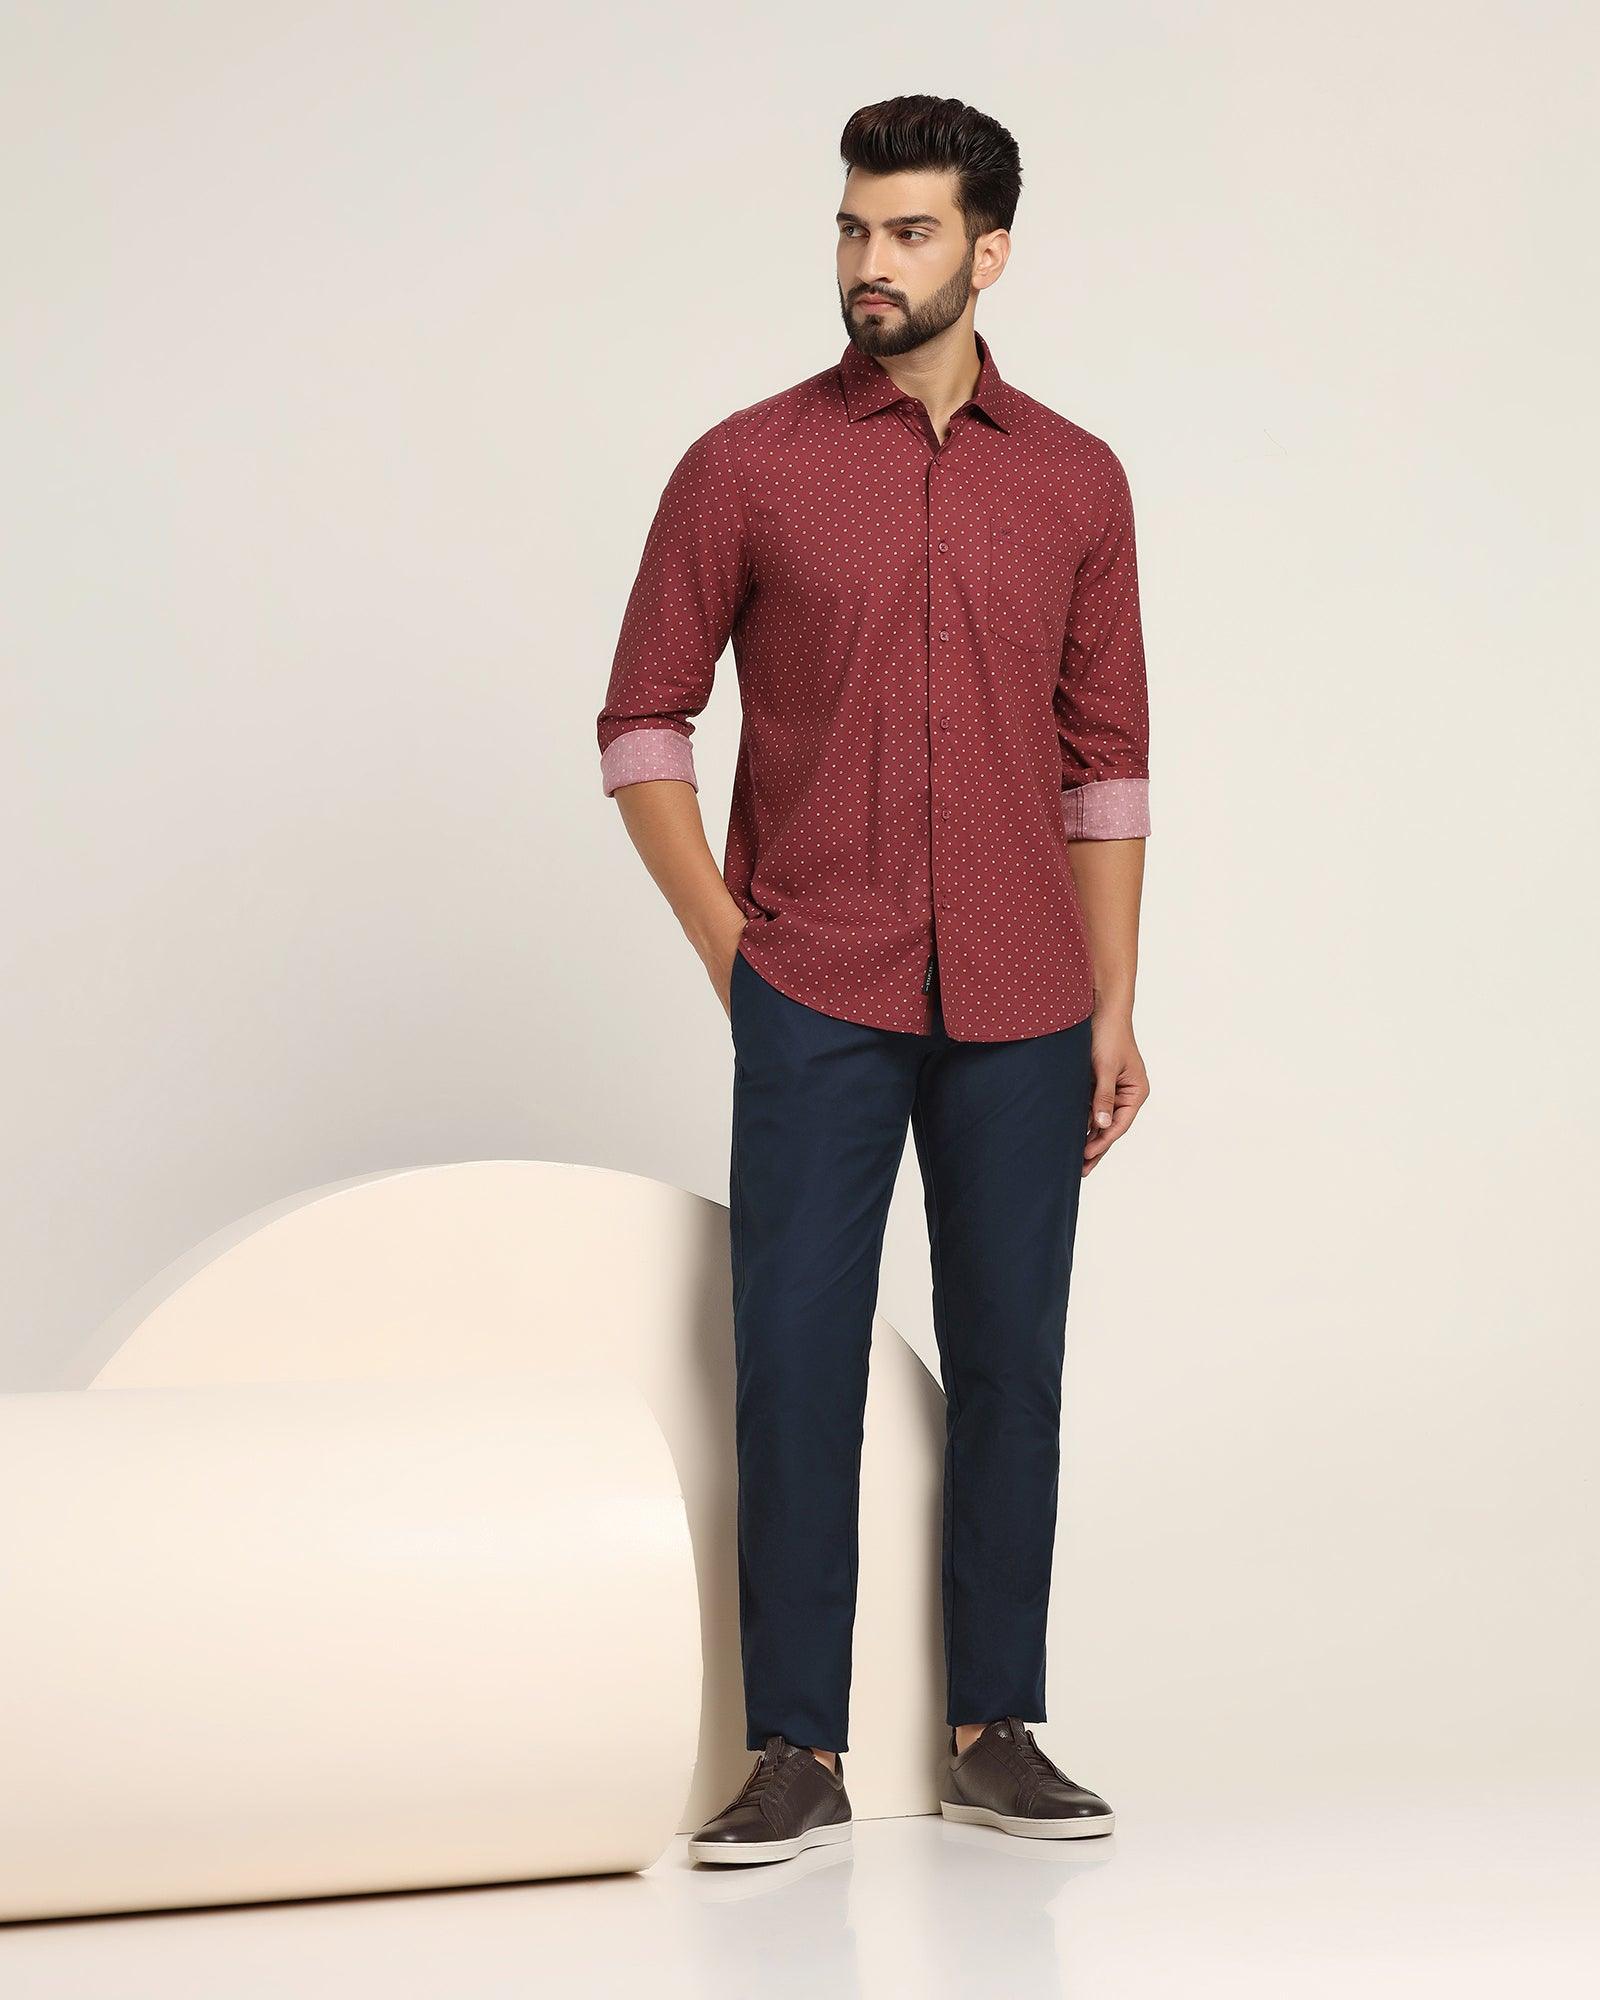 10 Best Maroon Shirt Matching Pant Ideas | Maroon Shirts Combination Pants  - TiptopGents | Men's formal style, Business casual men, Formal shirts for  men